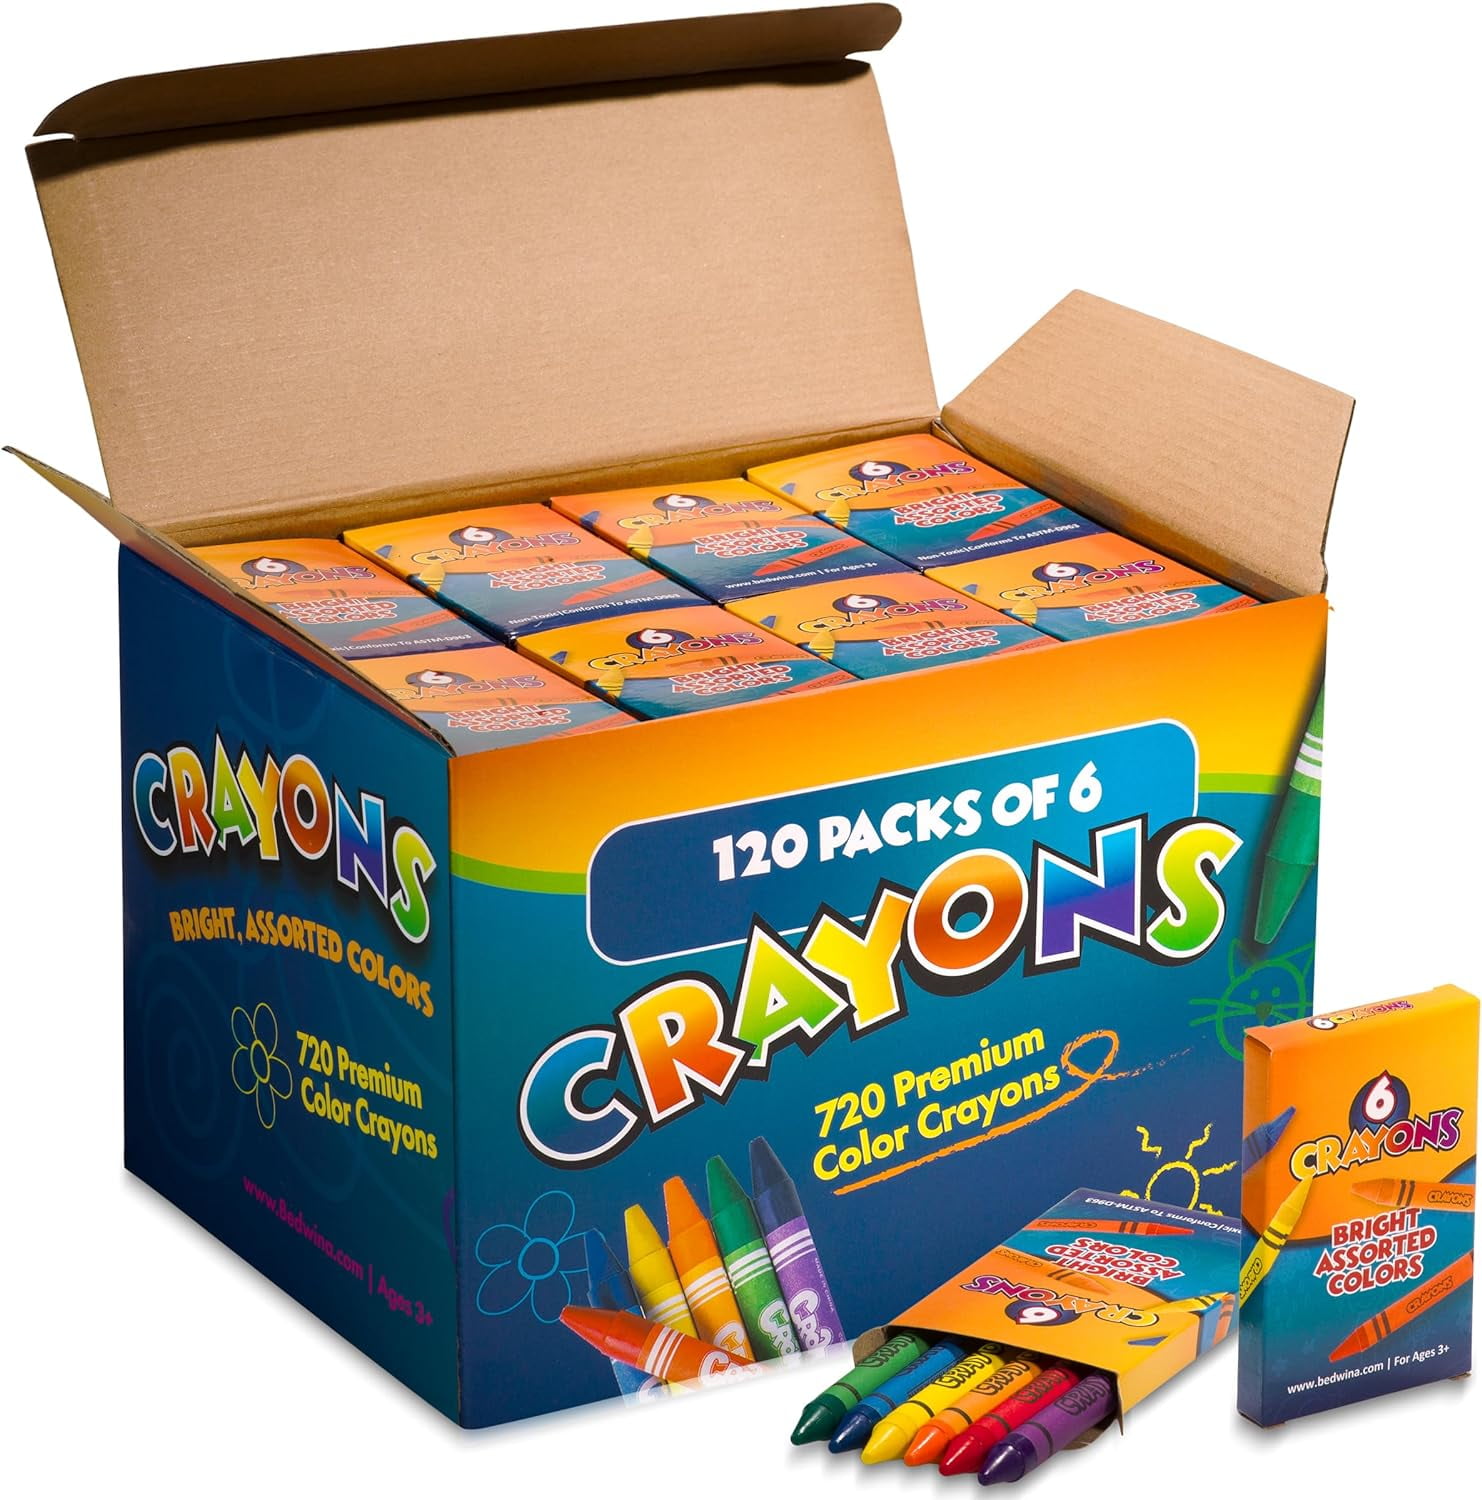 Crayola Giant Box of Crayons, Stocking Stuffers for Kids, Holiday